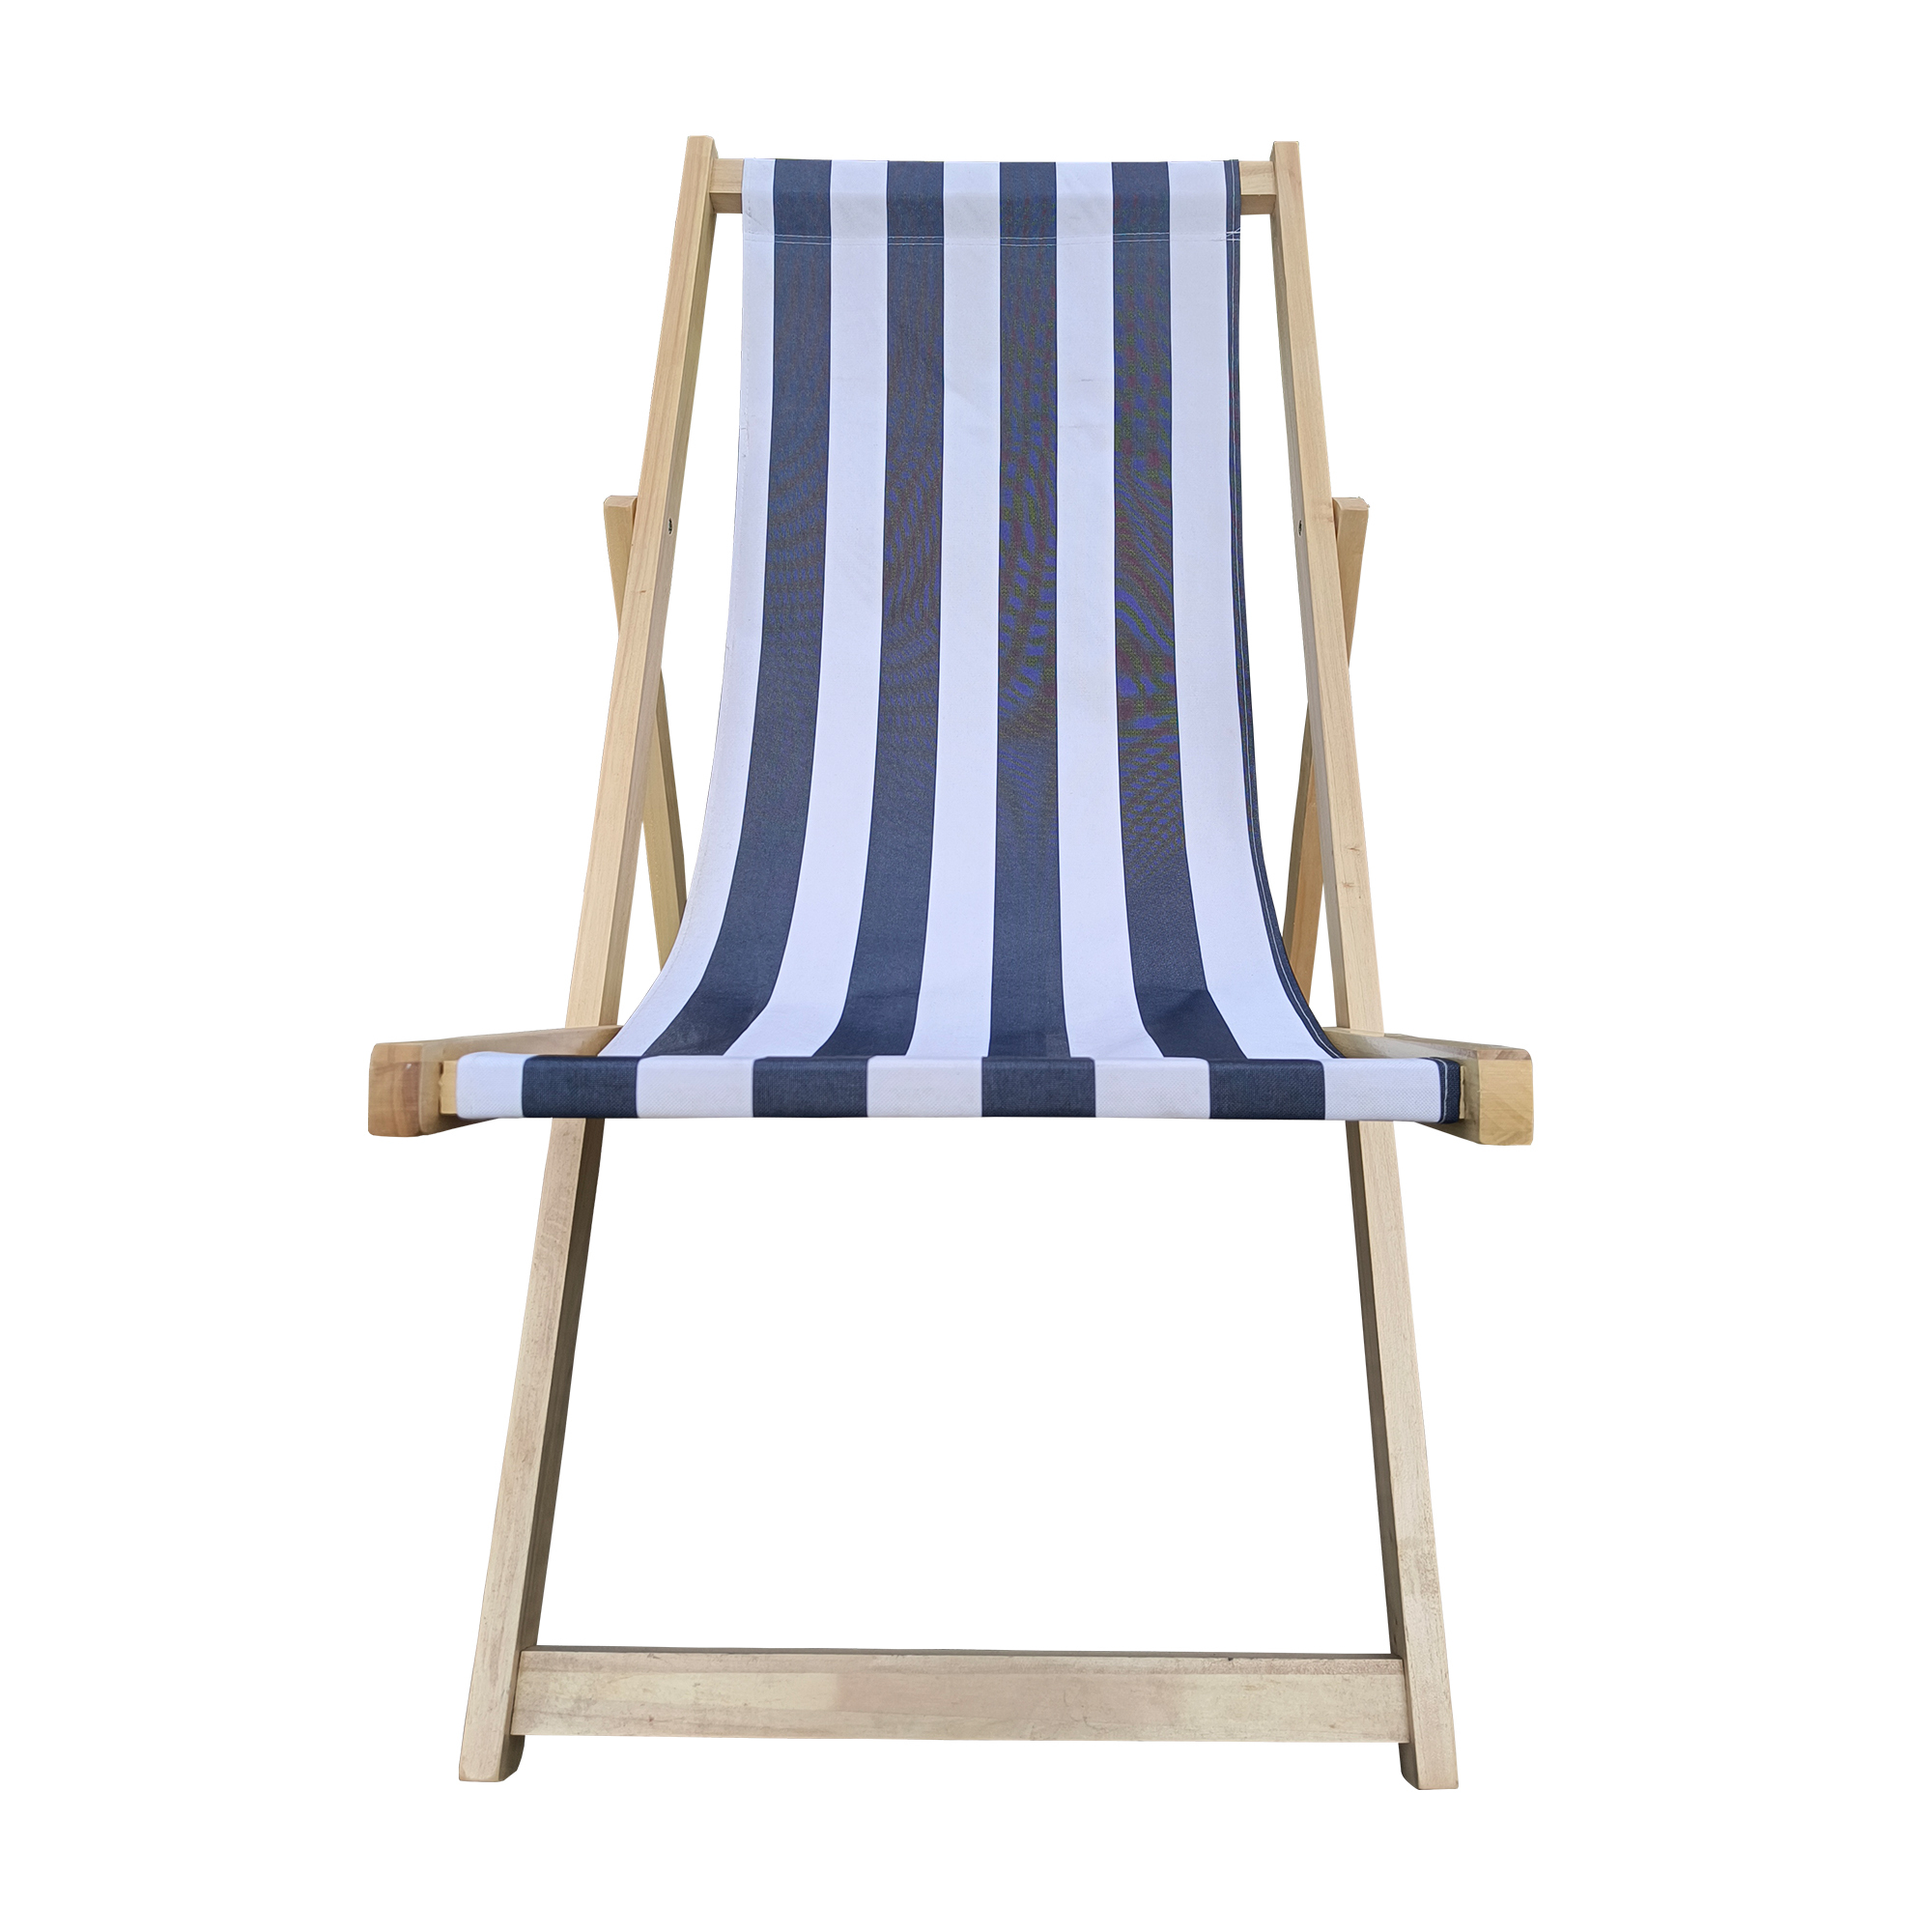 MONSTRUNO Stripe Chaise Lounge Chair - Garden Outdoor Folding Lounge Chairs Wood, Stacking Sling Chaise Lounge, Dark Blue - image 4 of 7